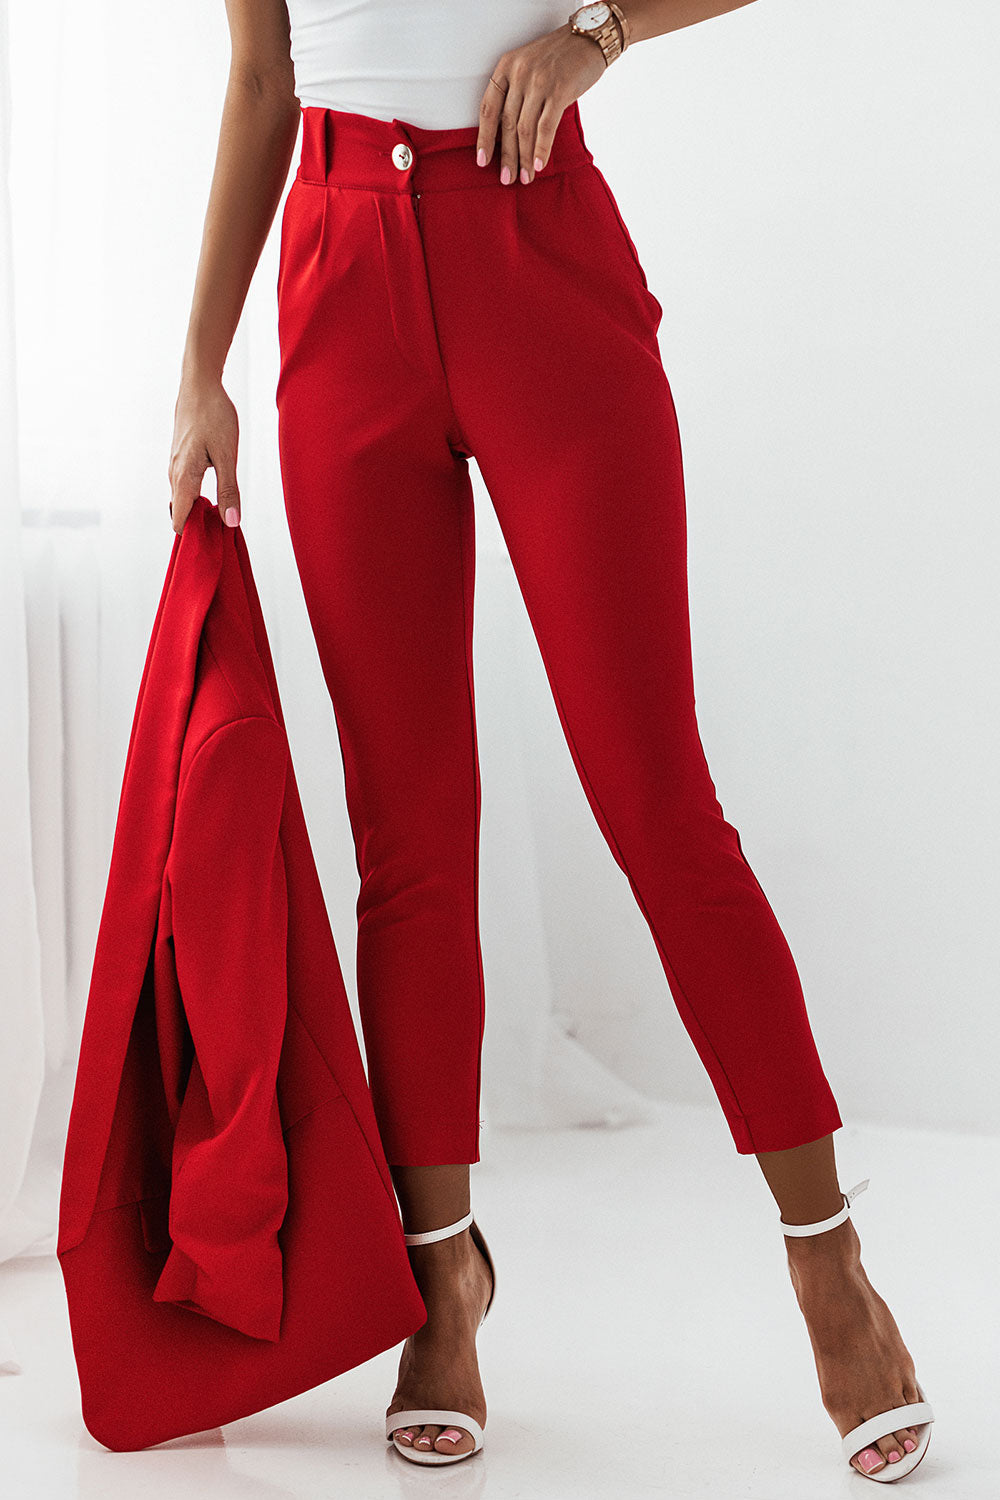 Red Suit Womens Set Blazer with Pants